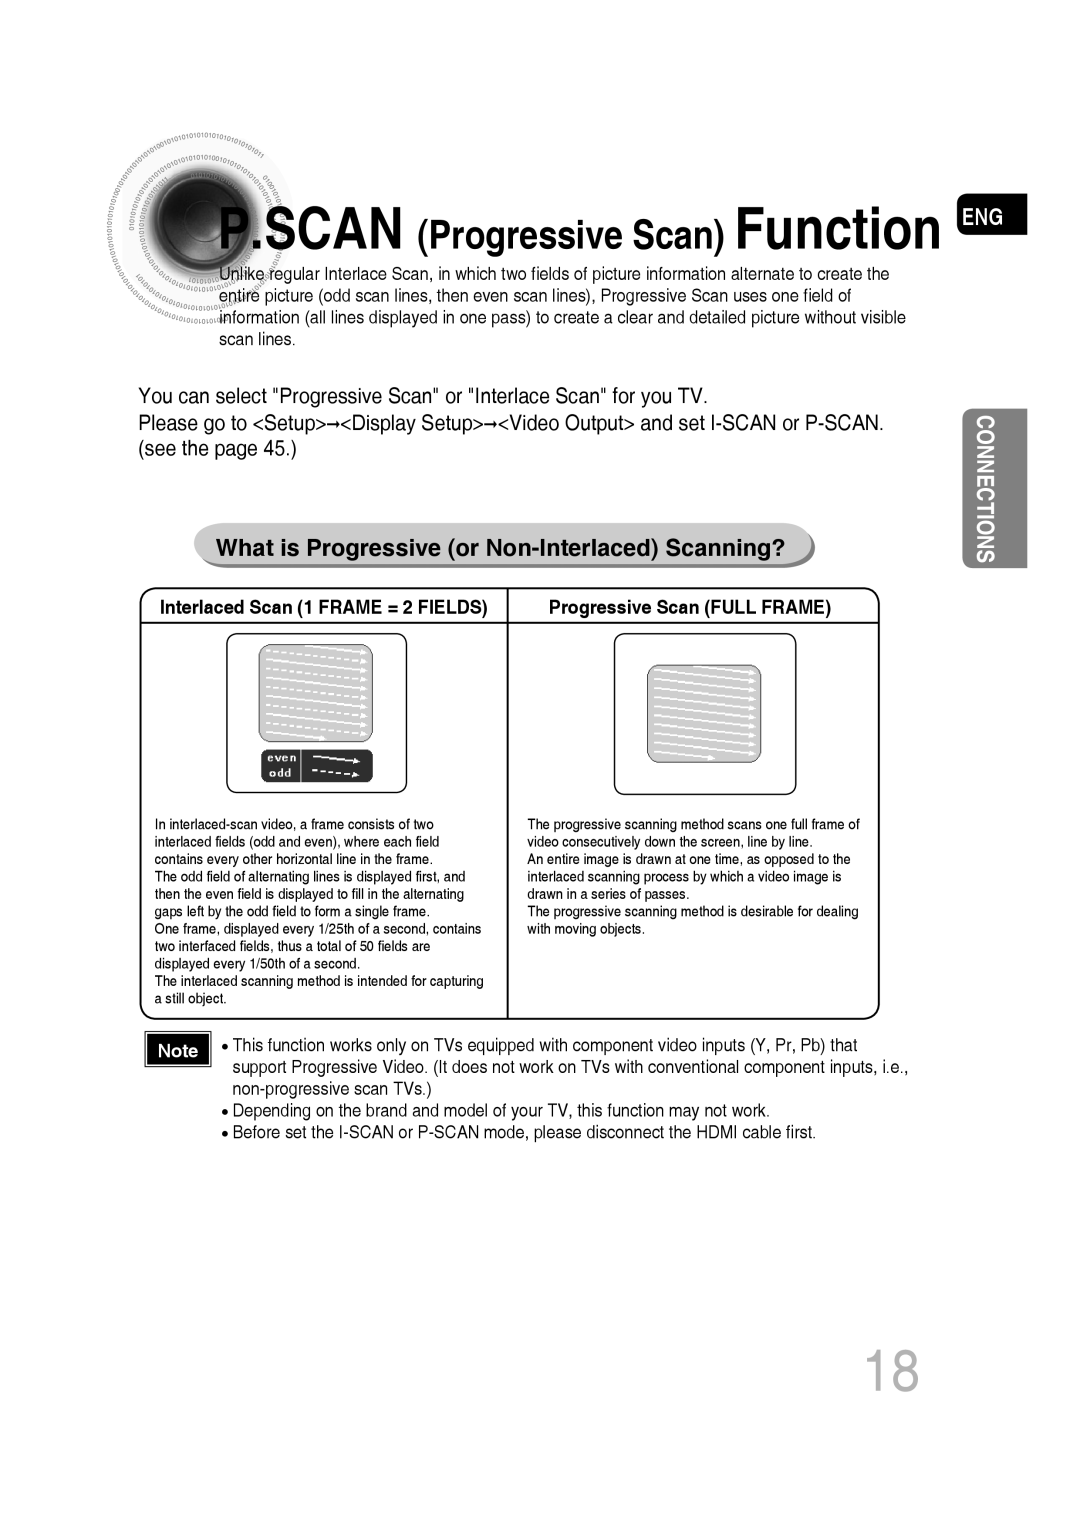 Samsung MM-C550D manual P.SCAN Progressive Scan Function ENG, What is Progressive or Non-Interlaced Scanning?, Connections 